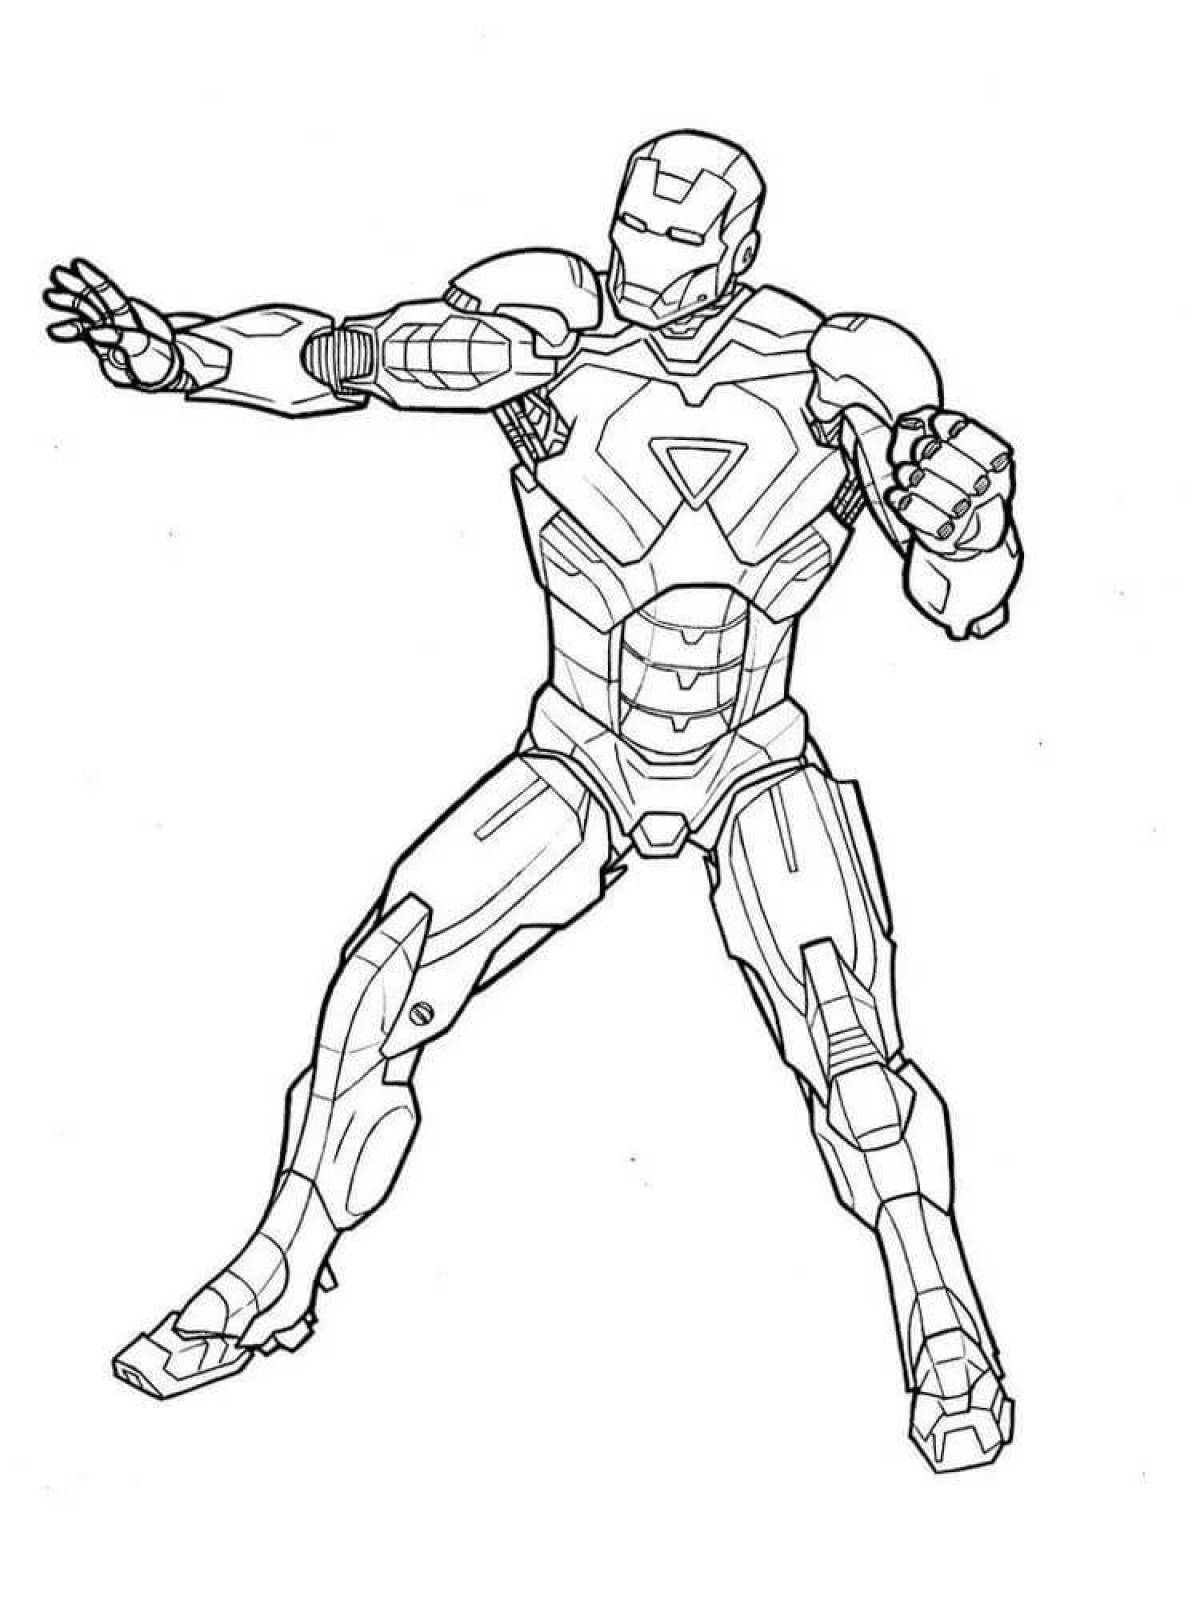 Joyful iron man coloring pages for kids